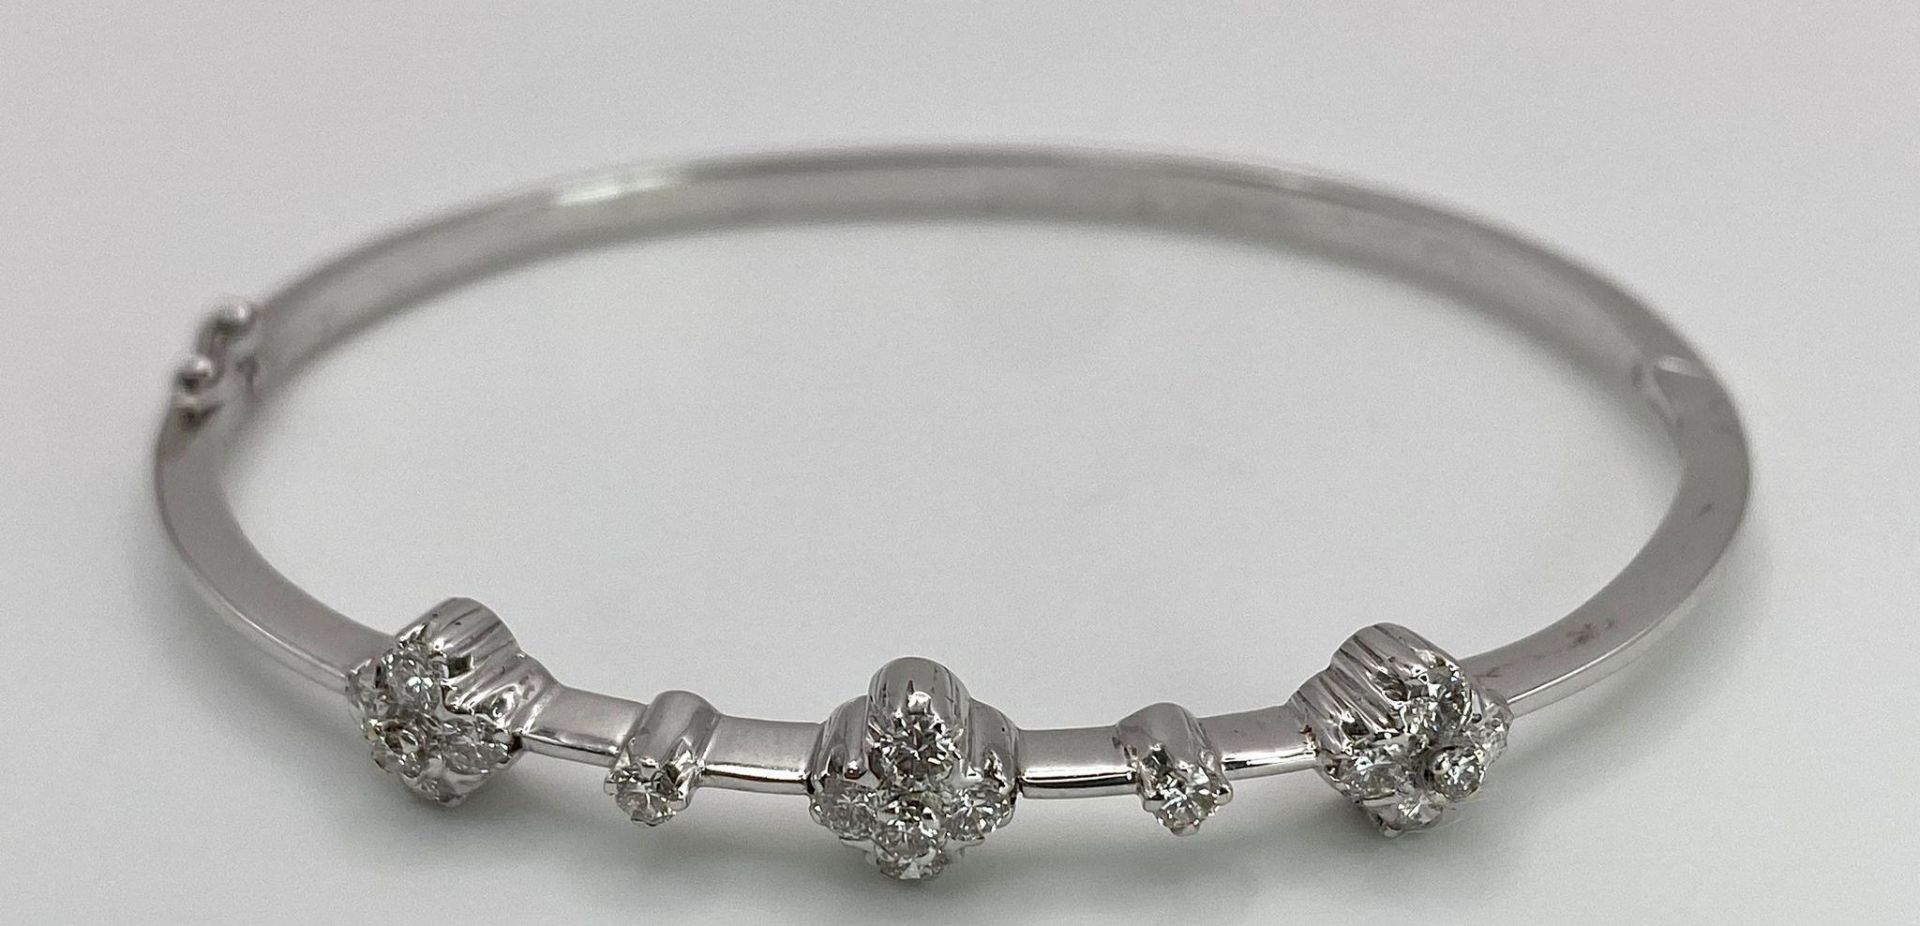 A VERY PRETTY AND ATTRACTIVE 18K WHITE GOLD DIAMOND SET BANGLE, APPROX 0.30CT, WEIGHT 8.5G AND